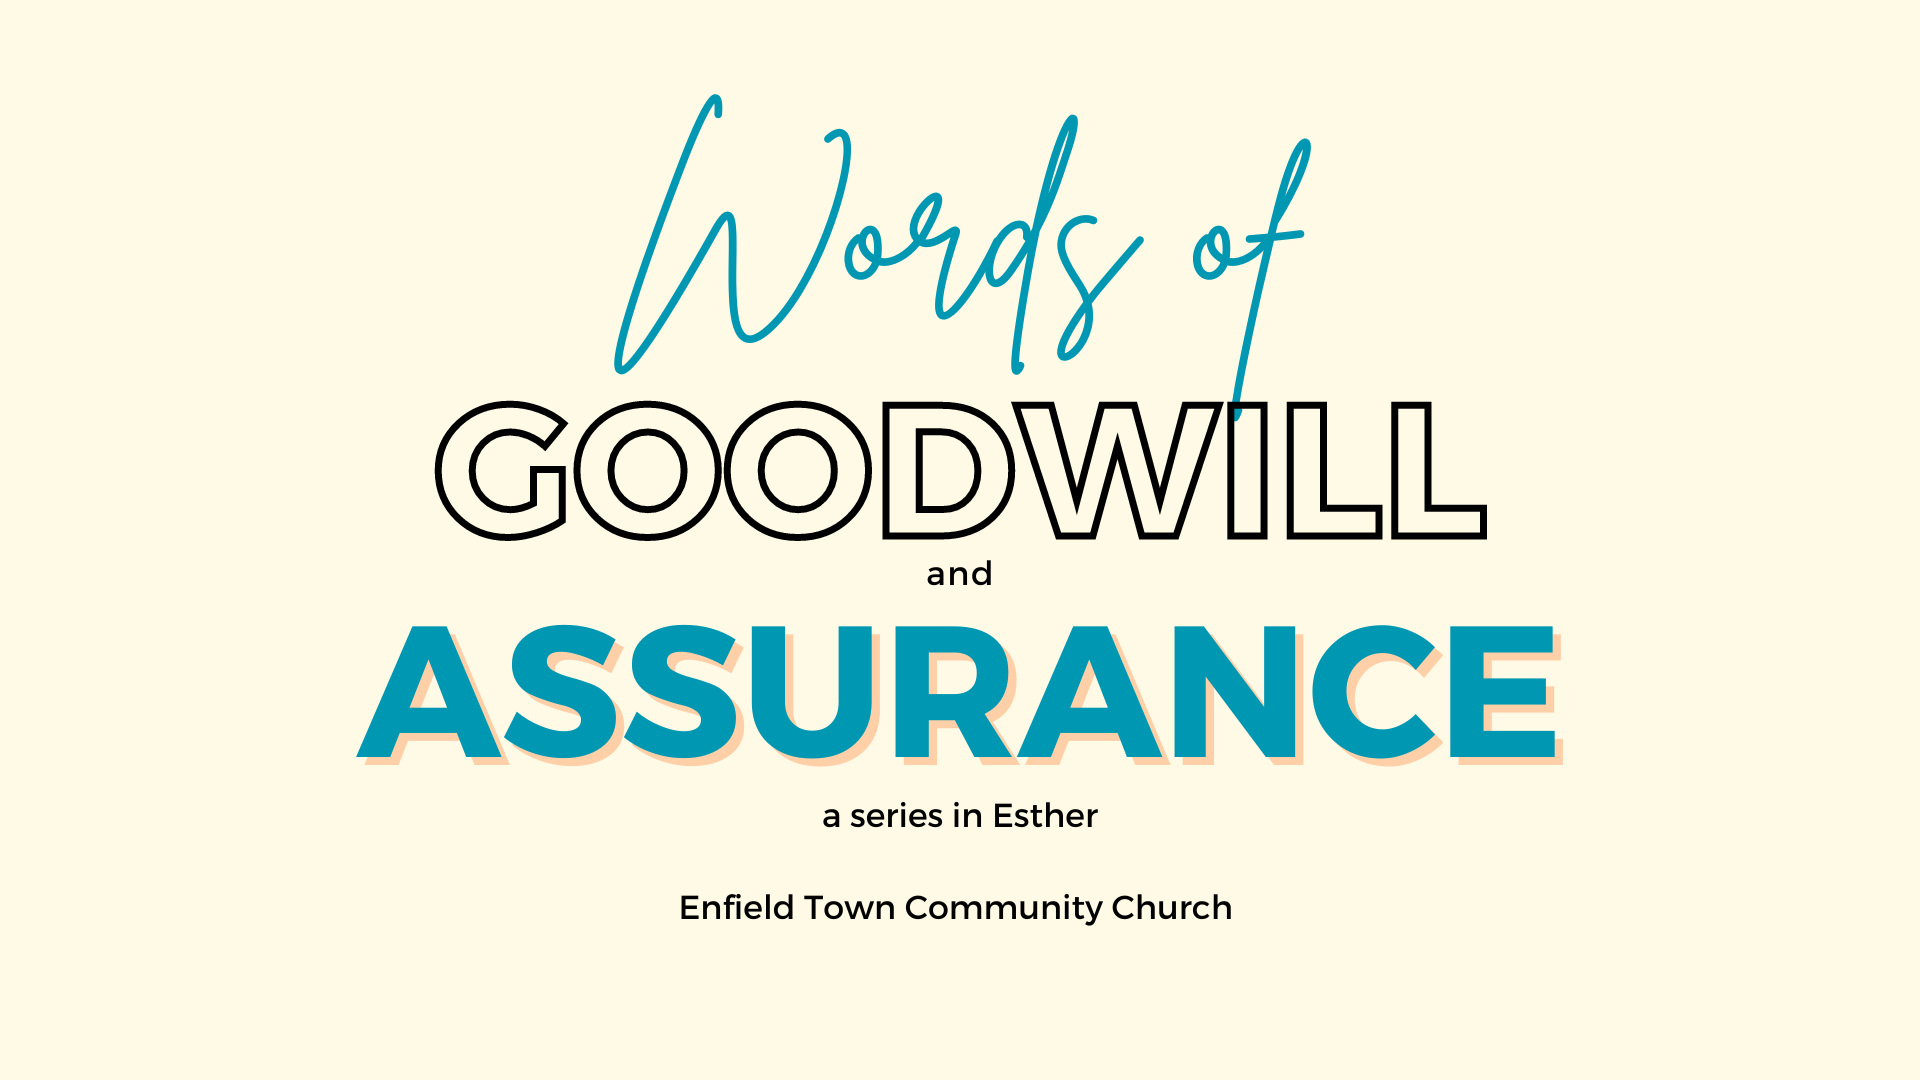 Words of Goodwill and Assuranc